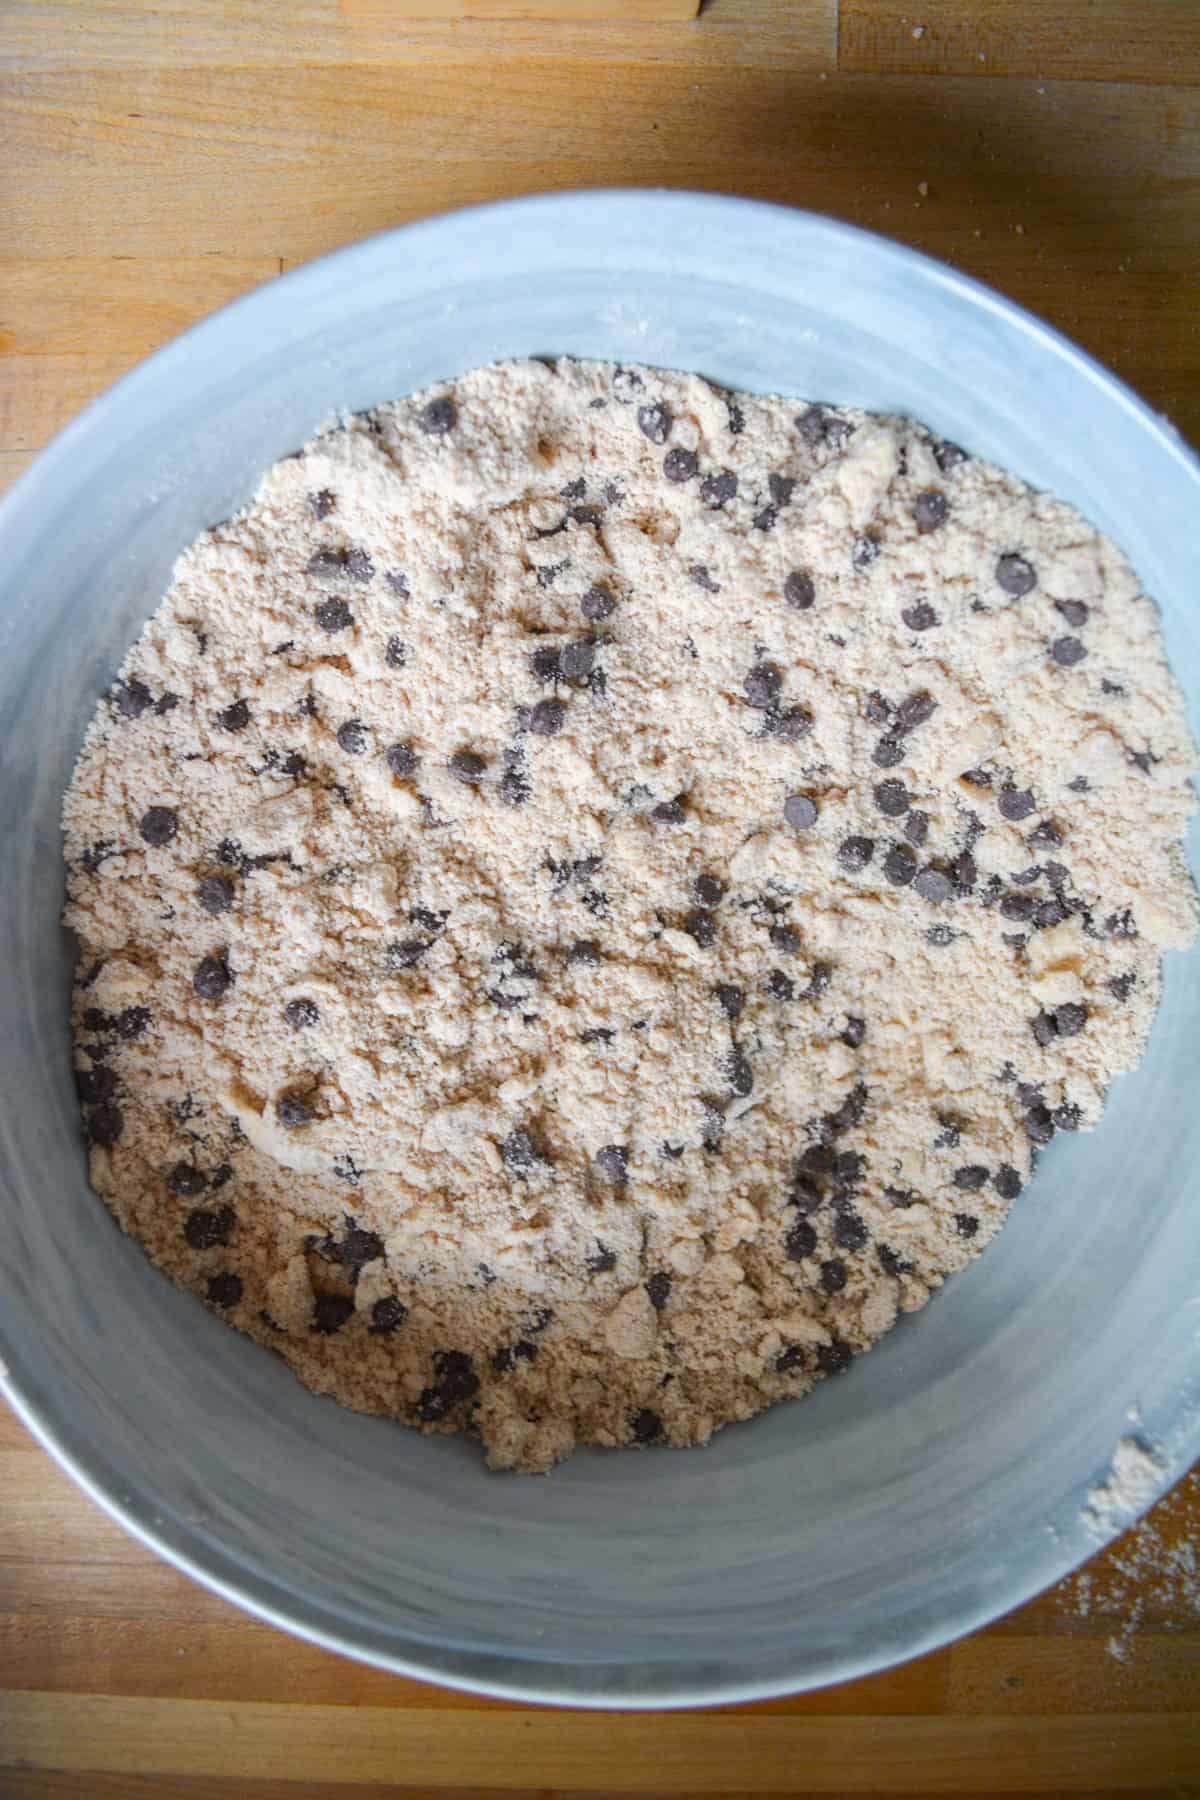 Mini chocolate chips added into the mixing bowl.